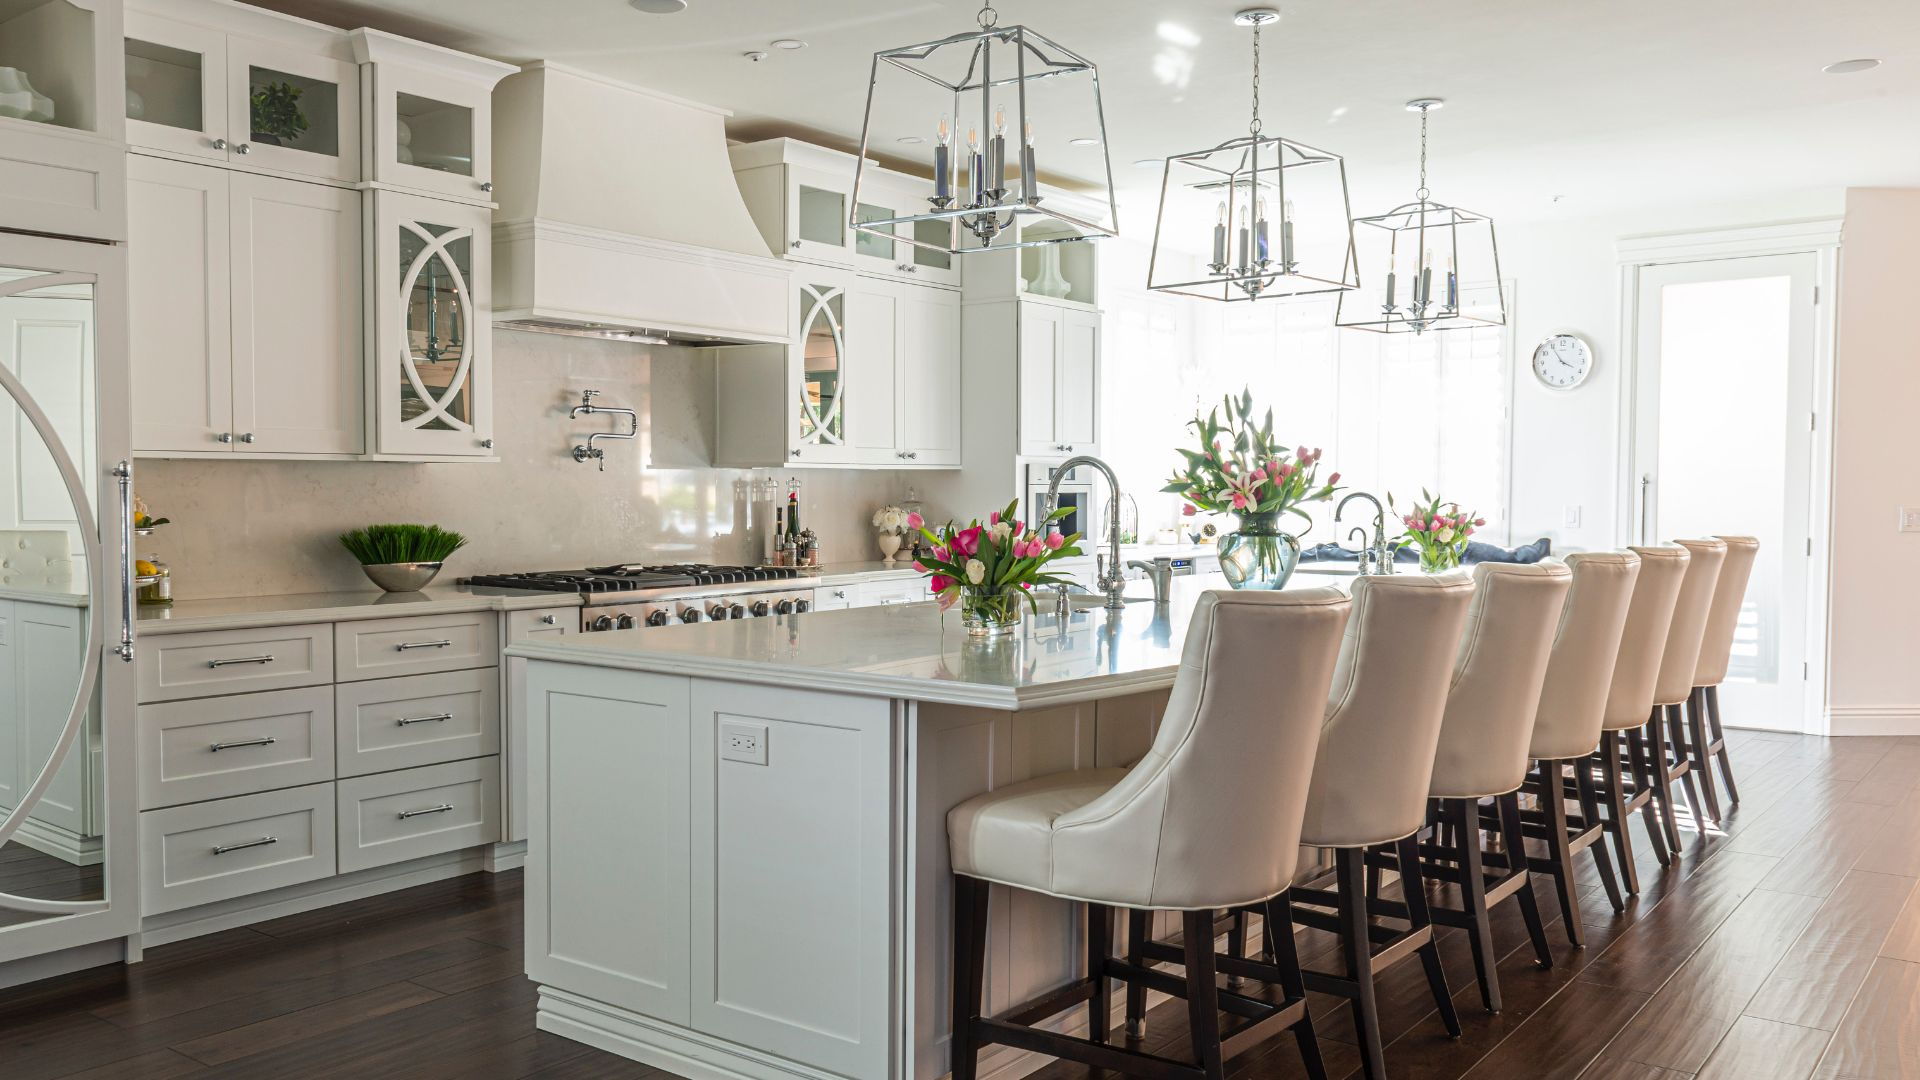 White Kitchen Style with White Cabinets and countertops